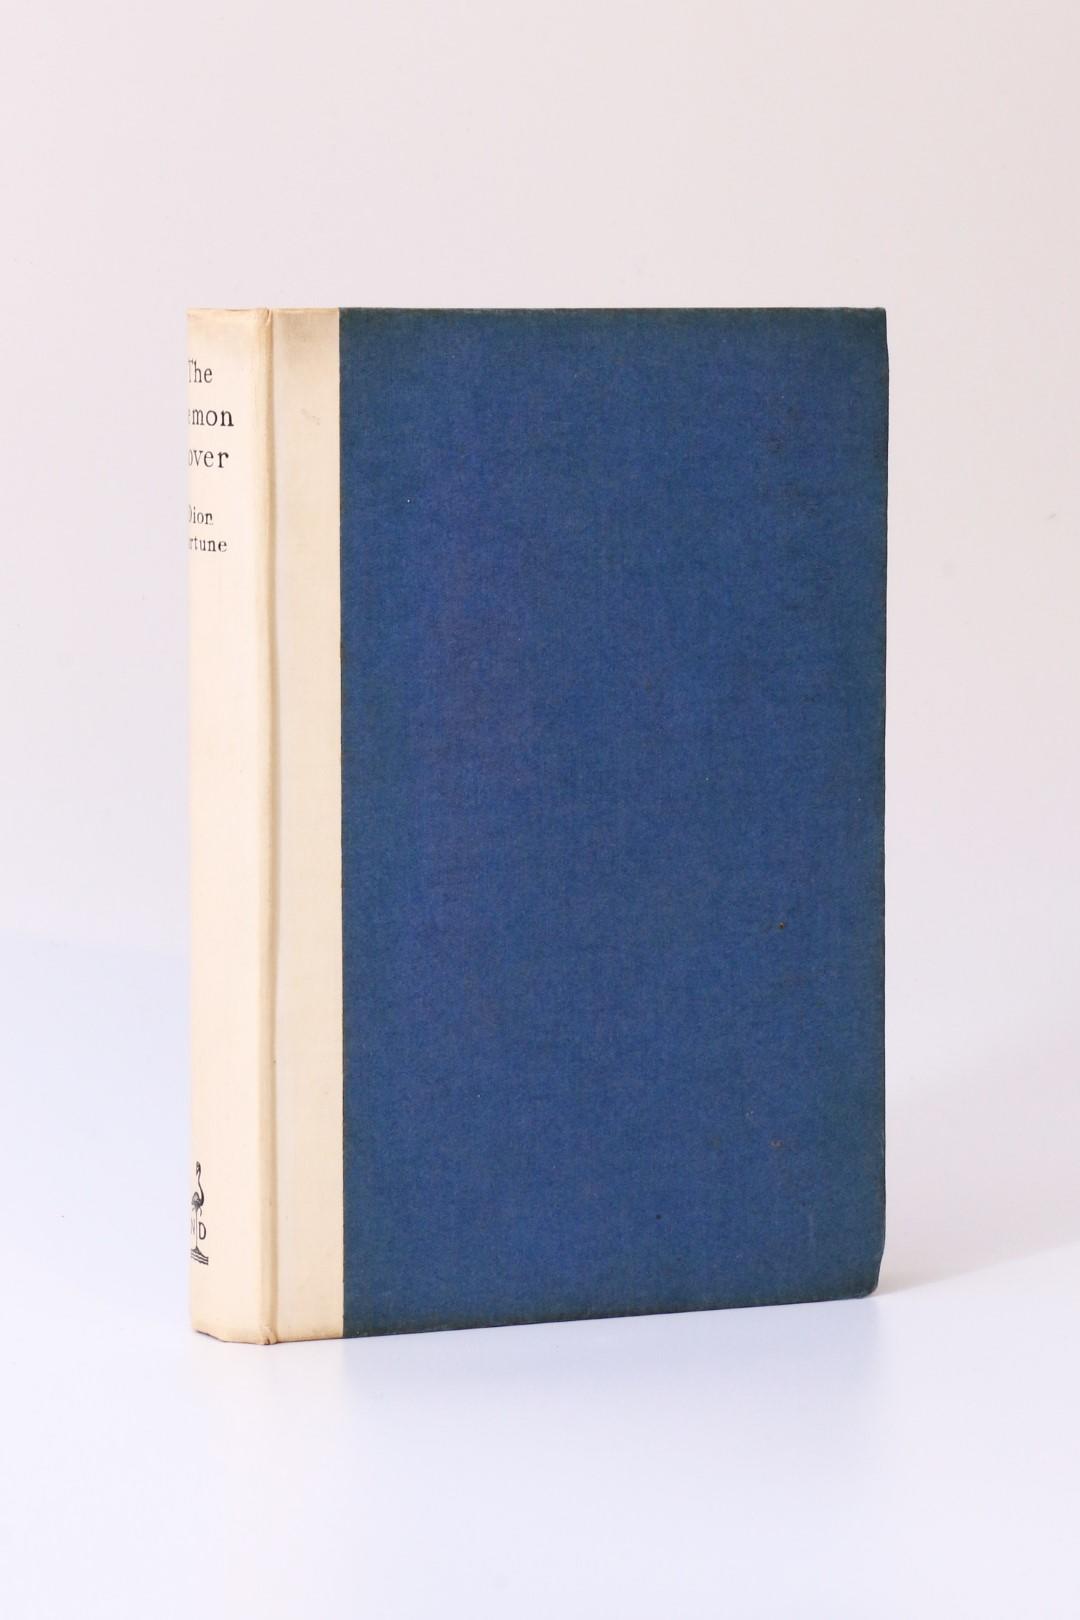 Dion Fortune - The Demon Lover - Noel Douglas, 1927, First Edition.